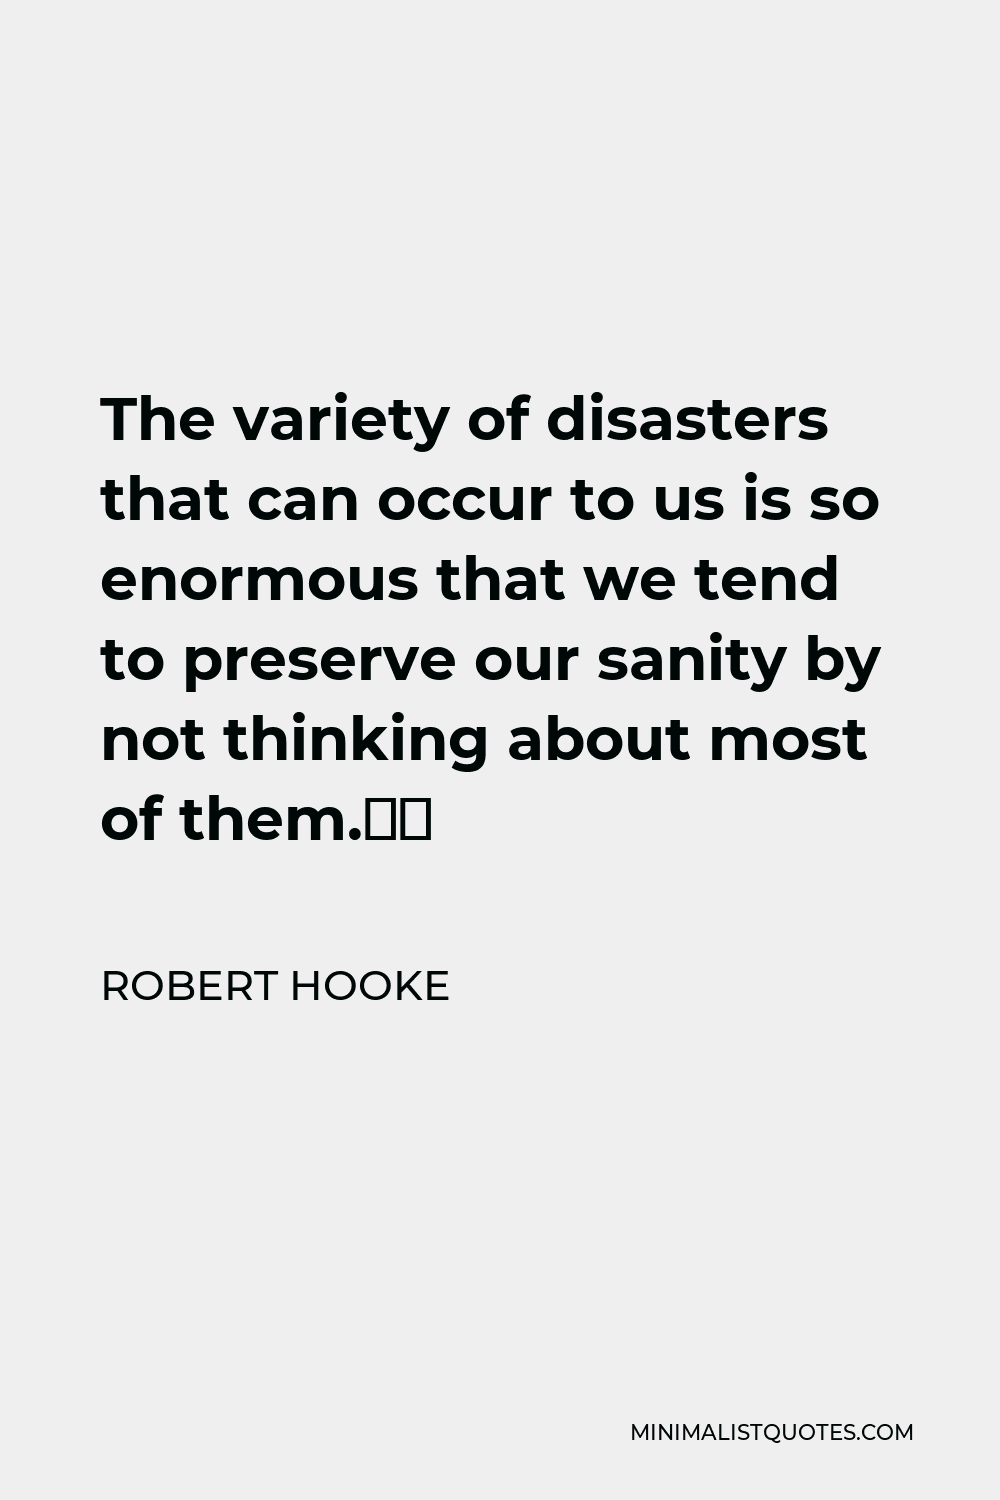 Robert Hooke Quote - The variety of disasters that can occur to us is so enormous that we tend to preserve our sanity by not thinking about most of them.”